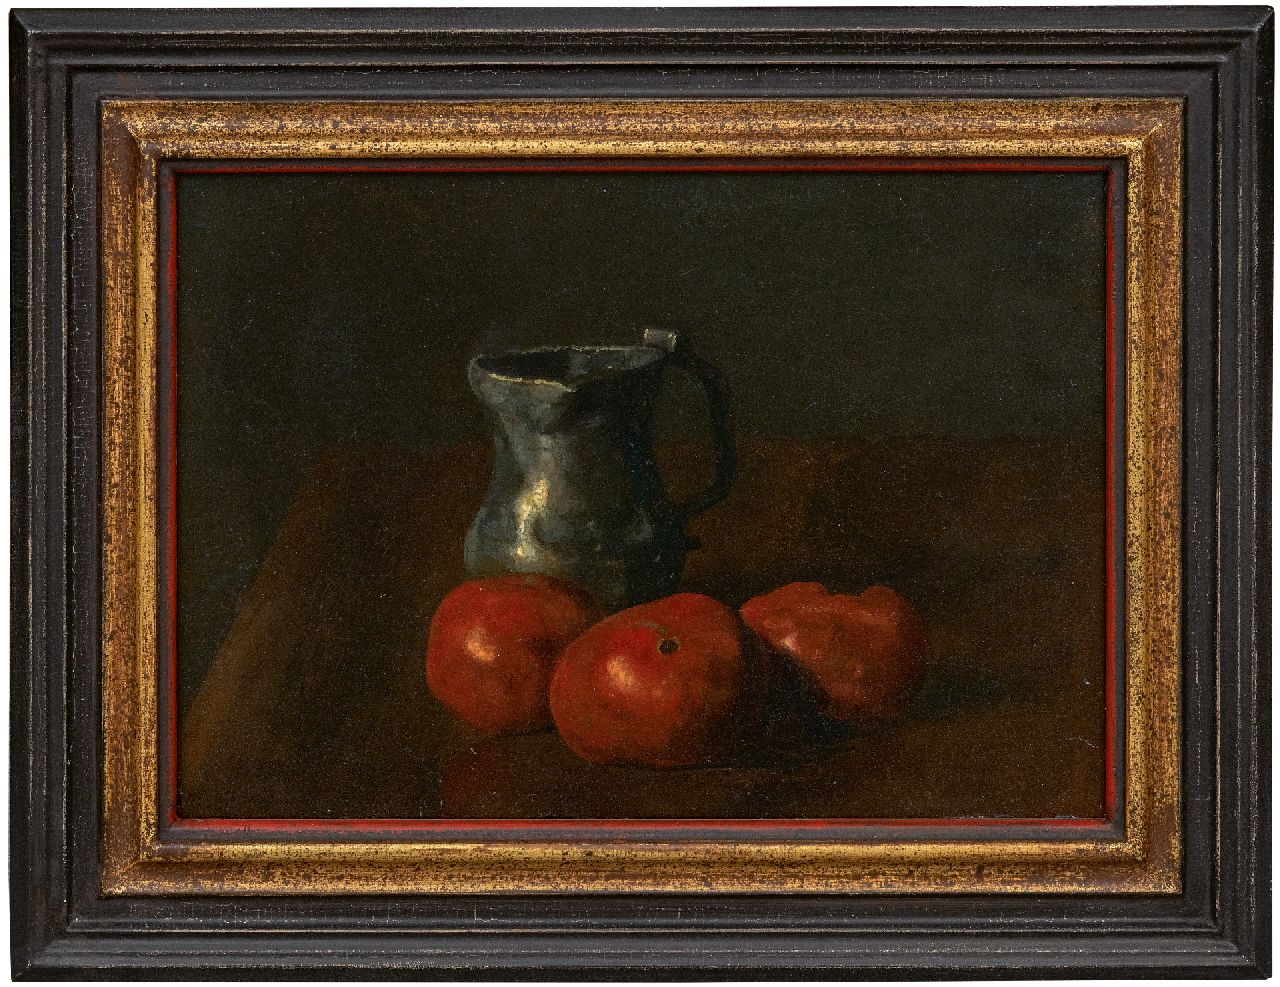 Jungmann M.J.B.  | 'Maarten' Johannes Balthasar Jungmann | Paintings offered for sale | A still life with a pewter jug and tomatoes, oil on panel 23.7 x 32.9 cm, signed l.l.